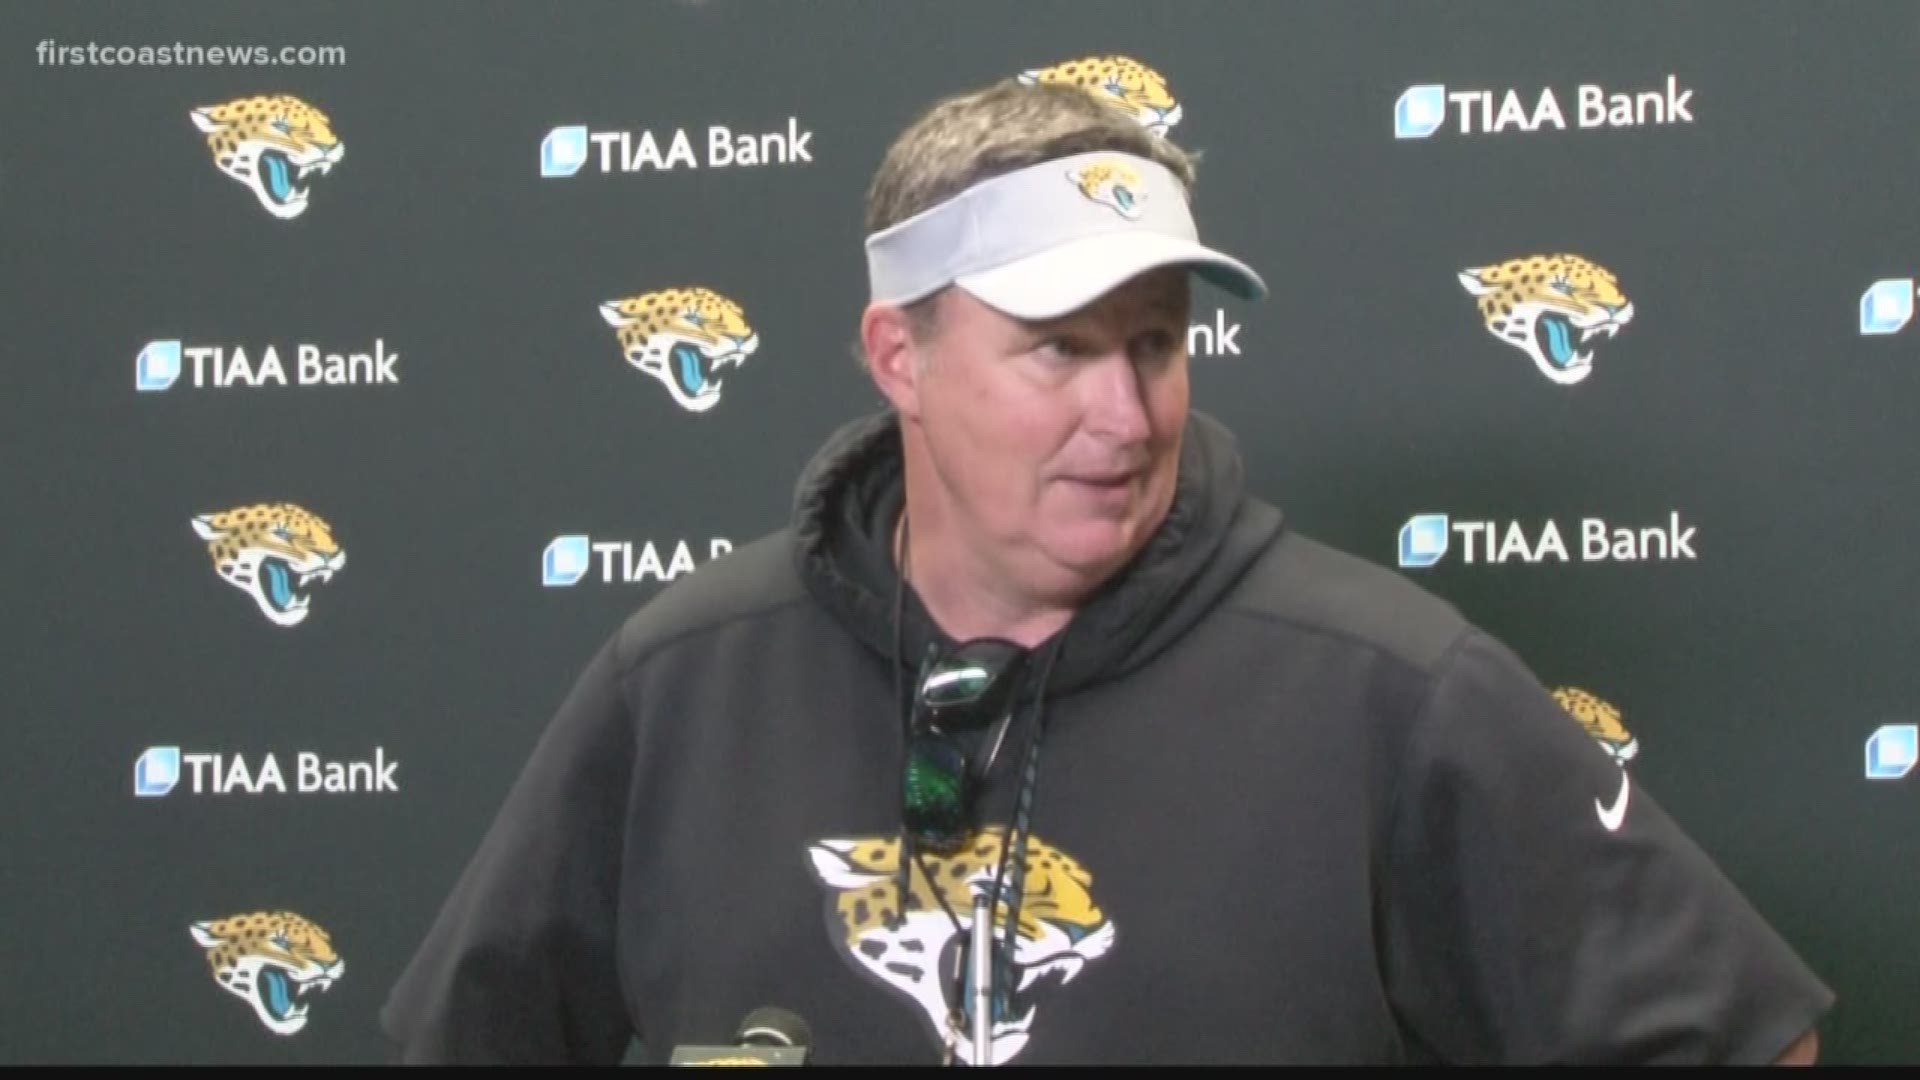 Jaguars head coach Doug Marrone learns AJ Bouye is out for Sunday's game vs. the Indianapolis Colts from reporters. 'That's news to me. I guess I'll have to talk to him about that.'